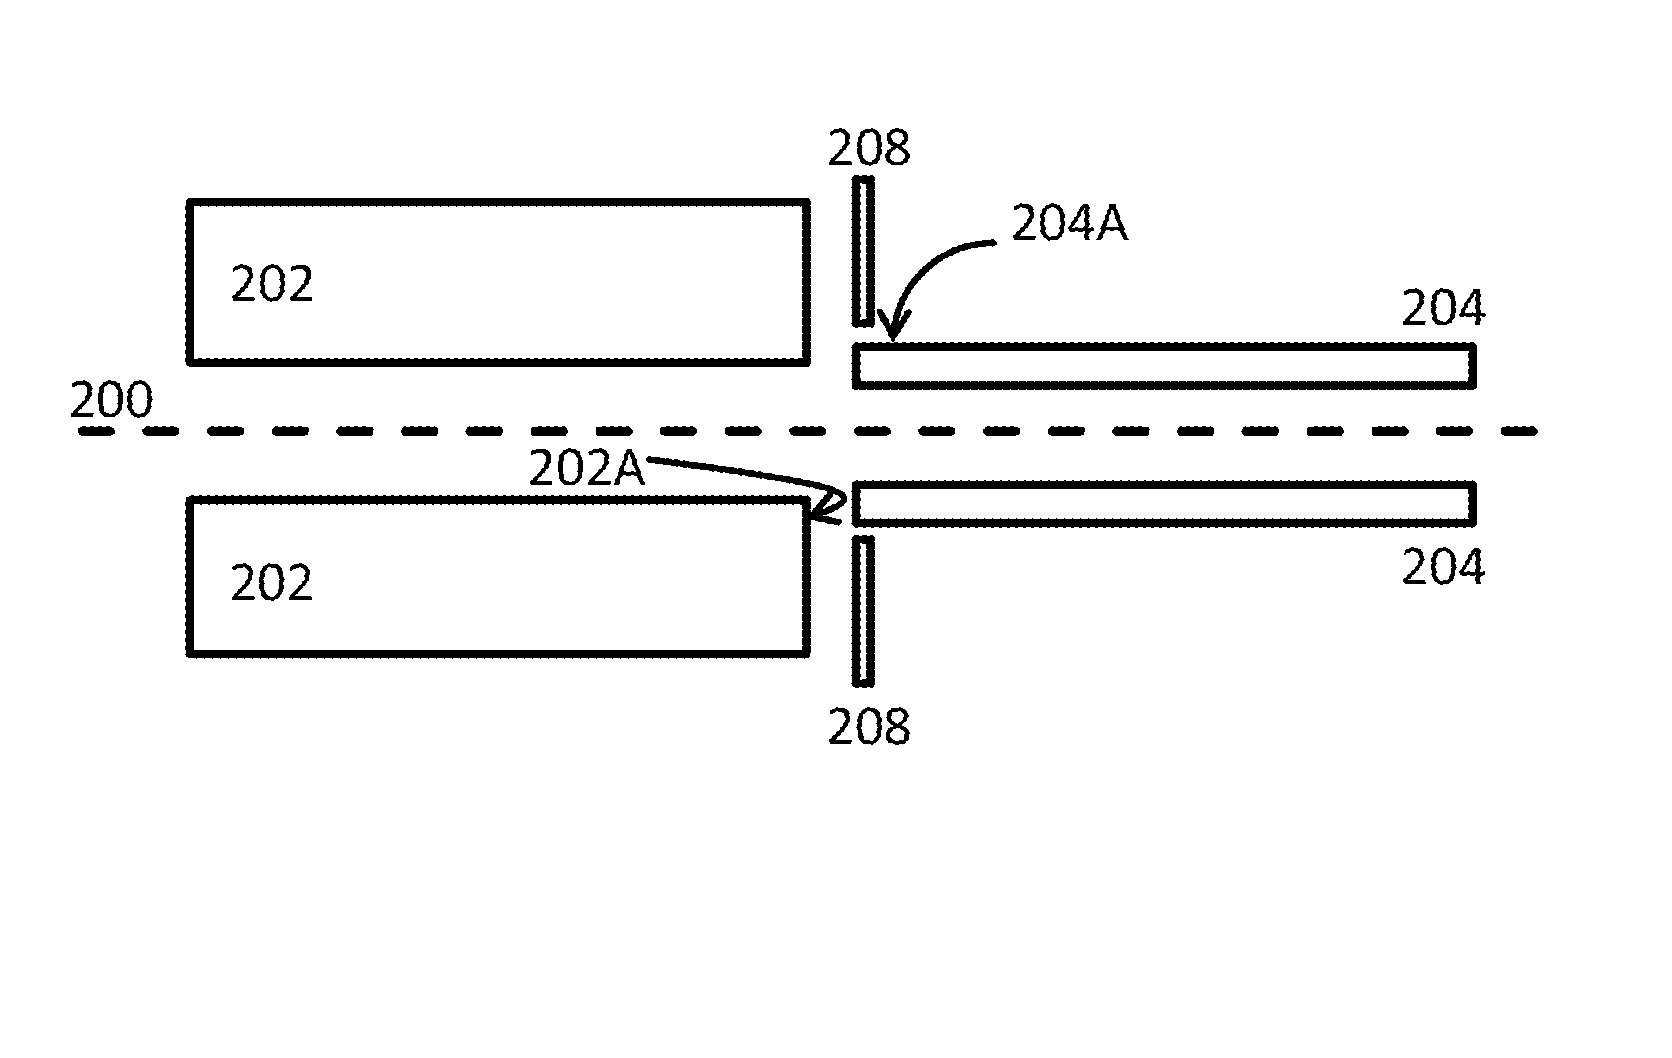 Reduction of cross-talk between RF components in a mass spectrometer